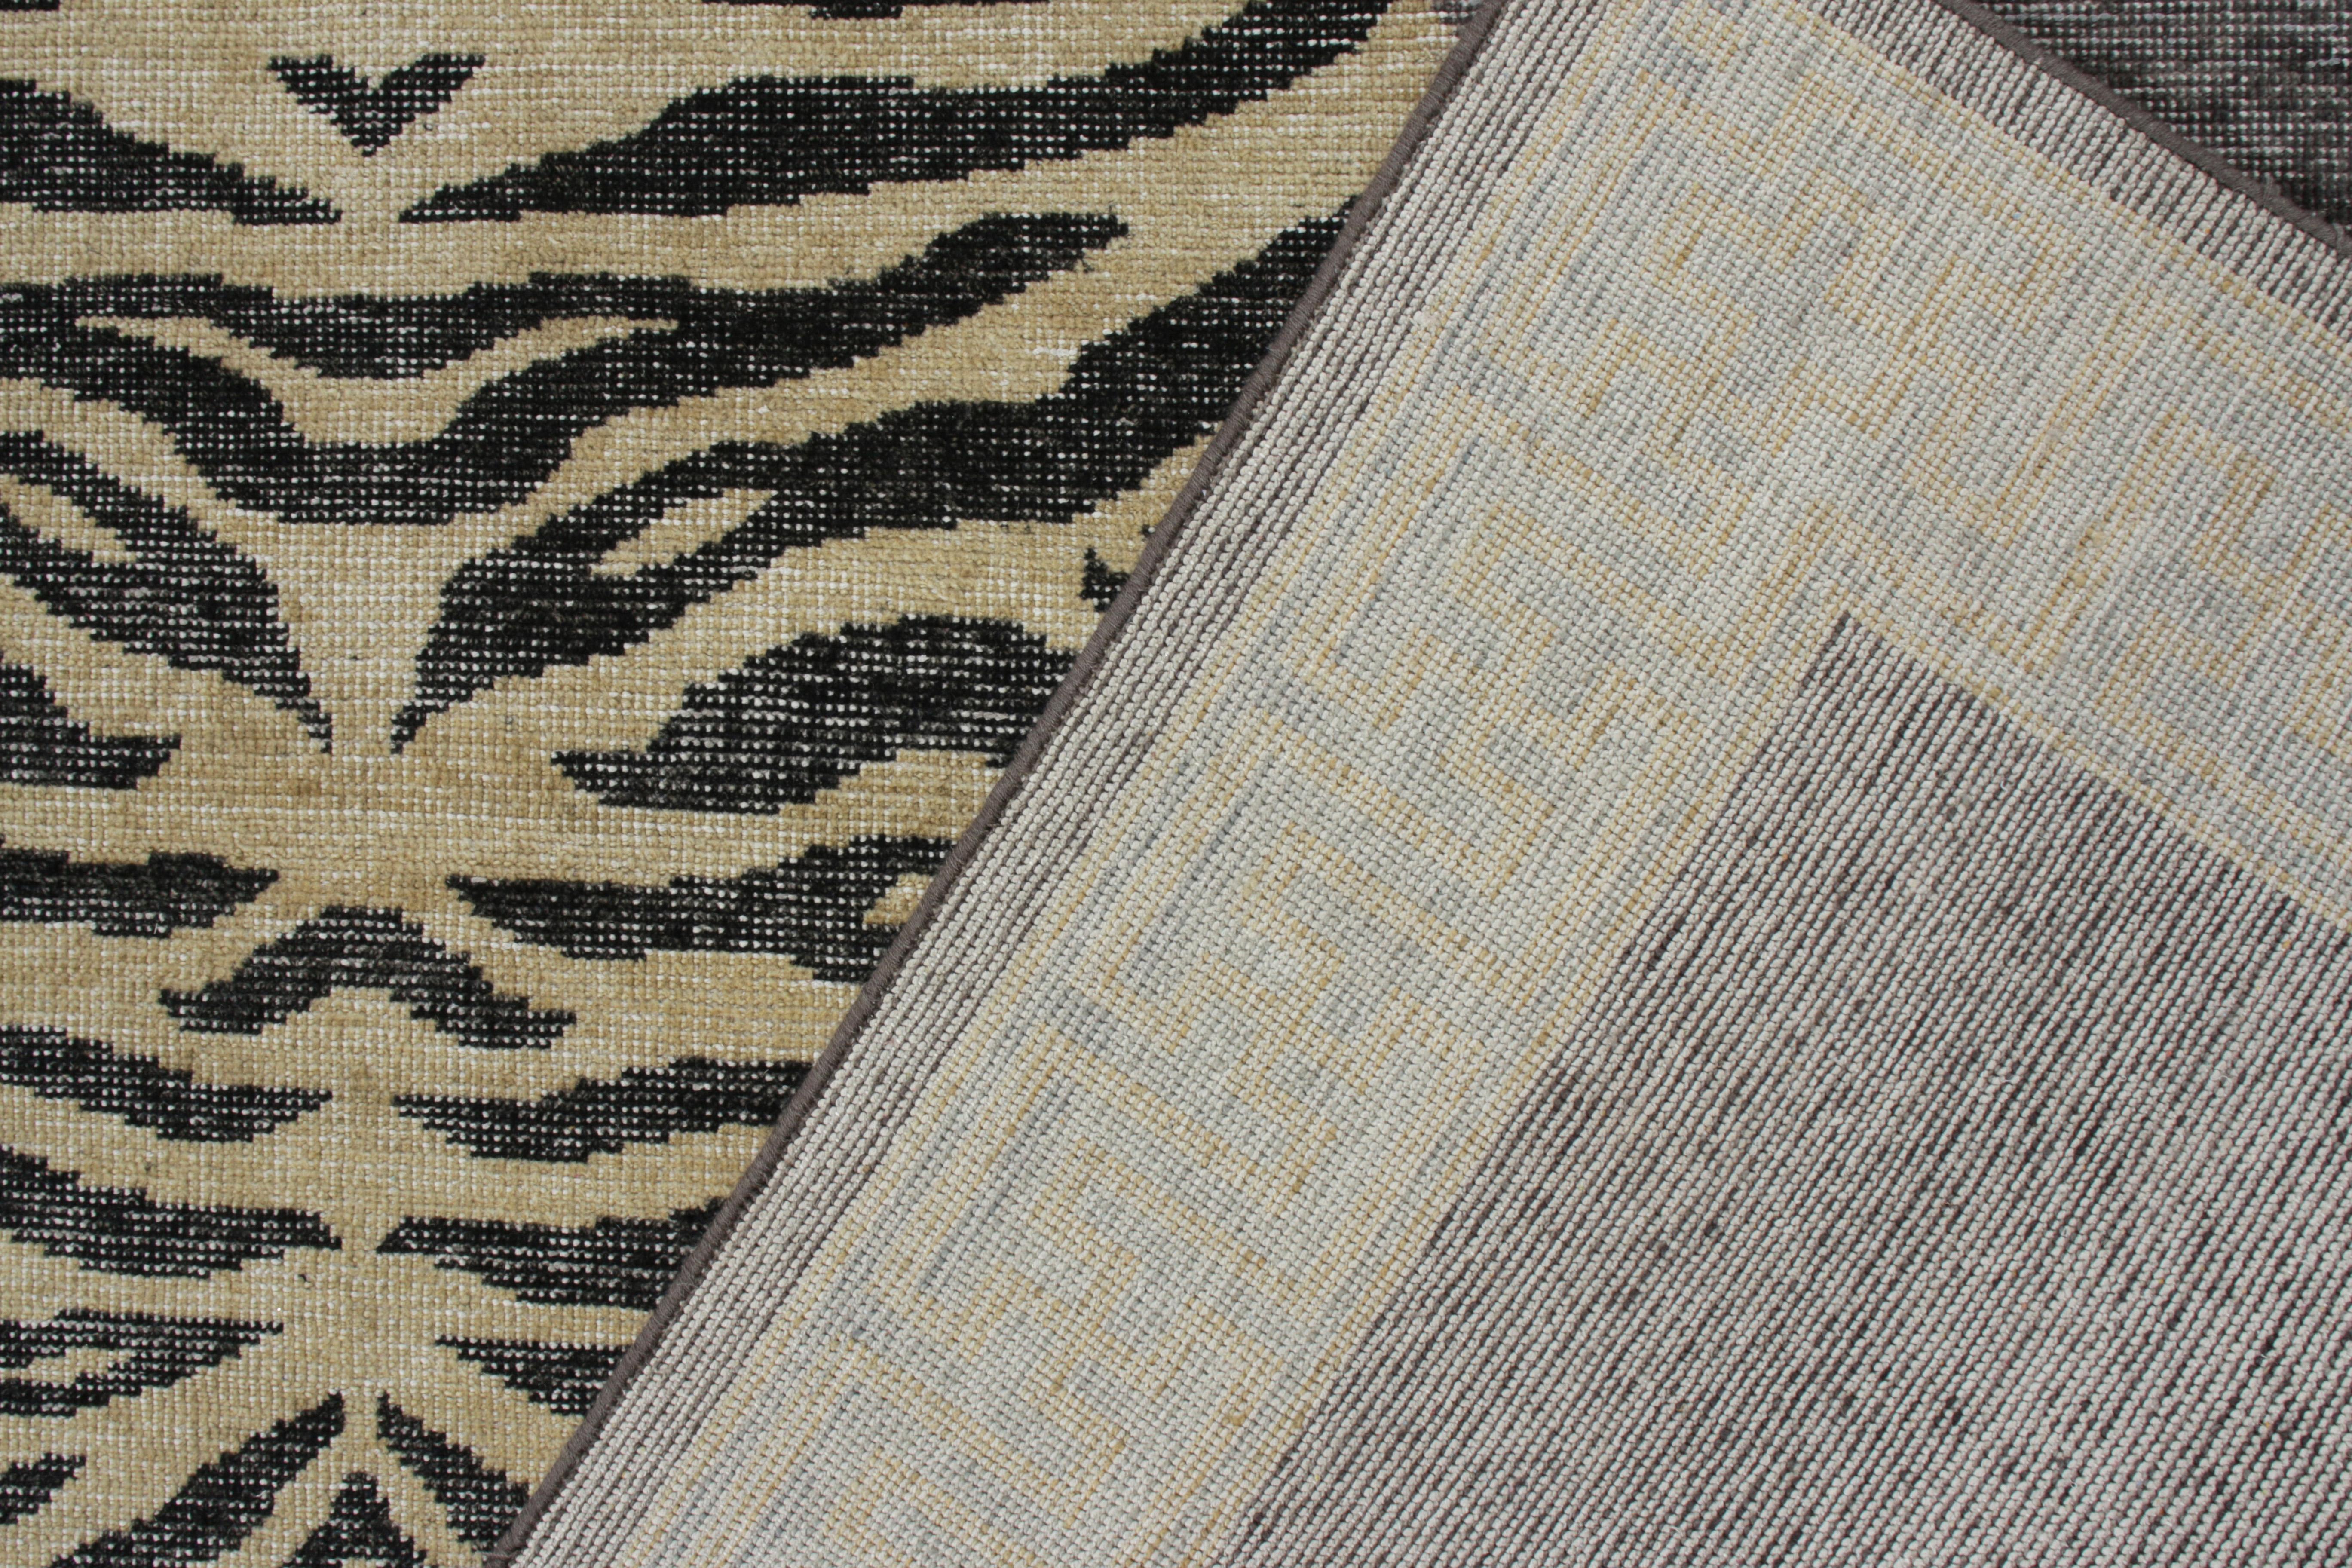 Hand-Knotted Rug & Kilim’s Distressed Custom Tiger Rug in Gray, Beige Black Pictorial Pattern For Sale